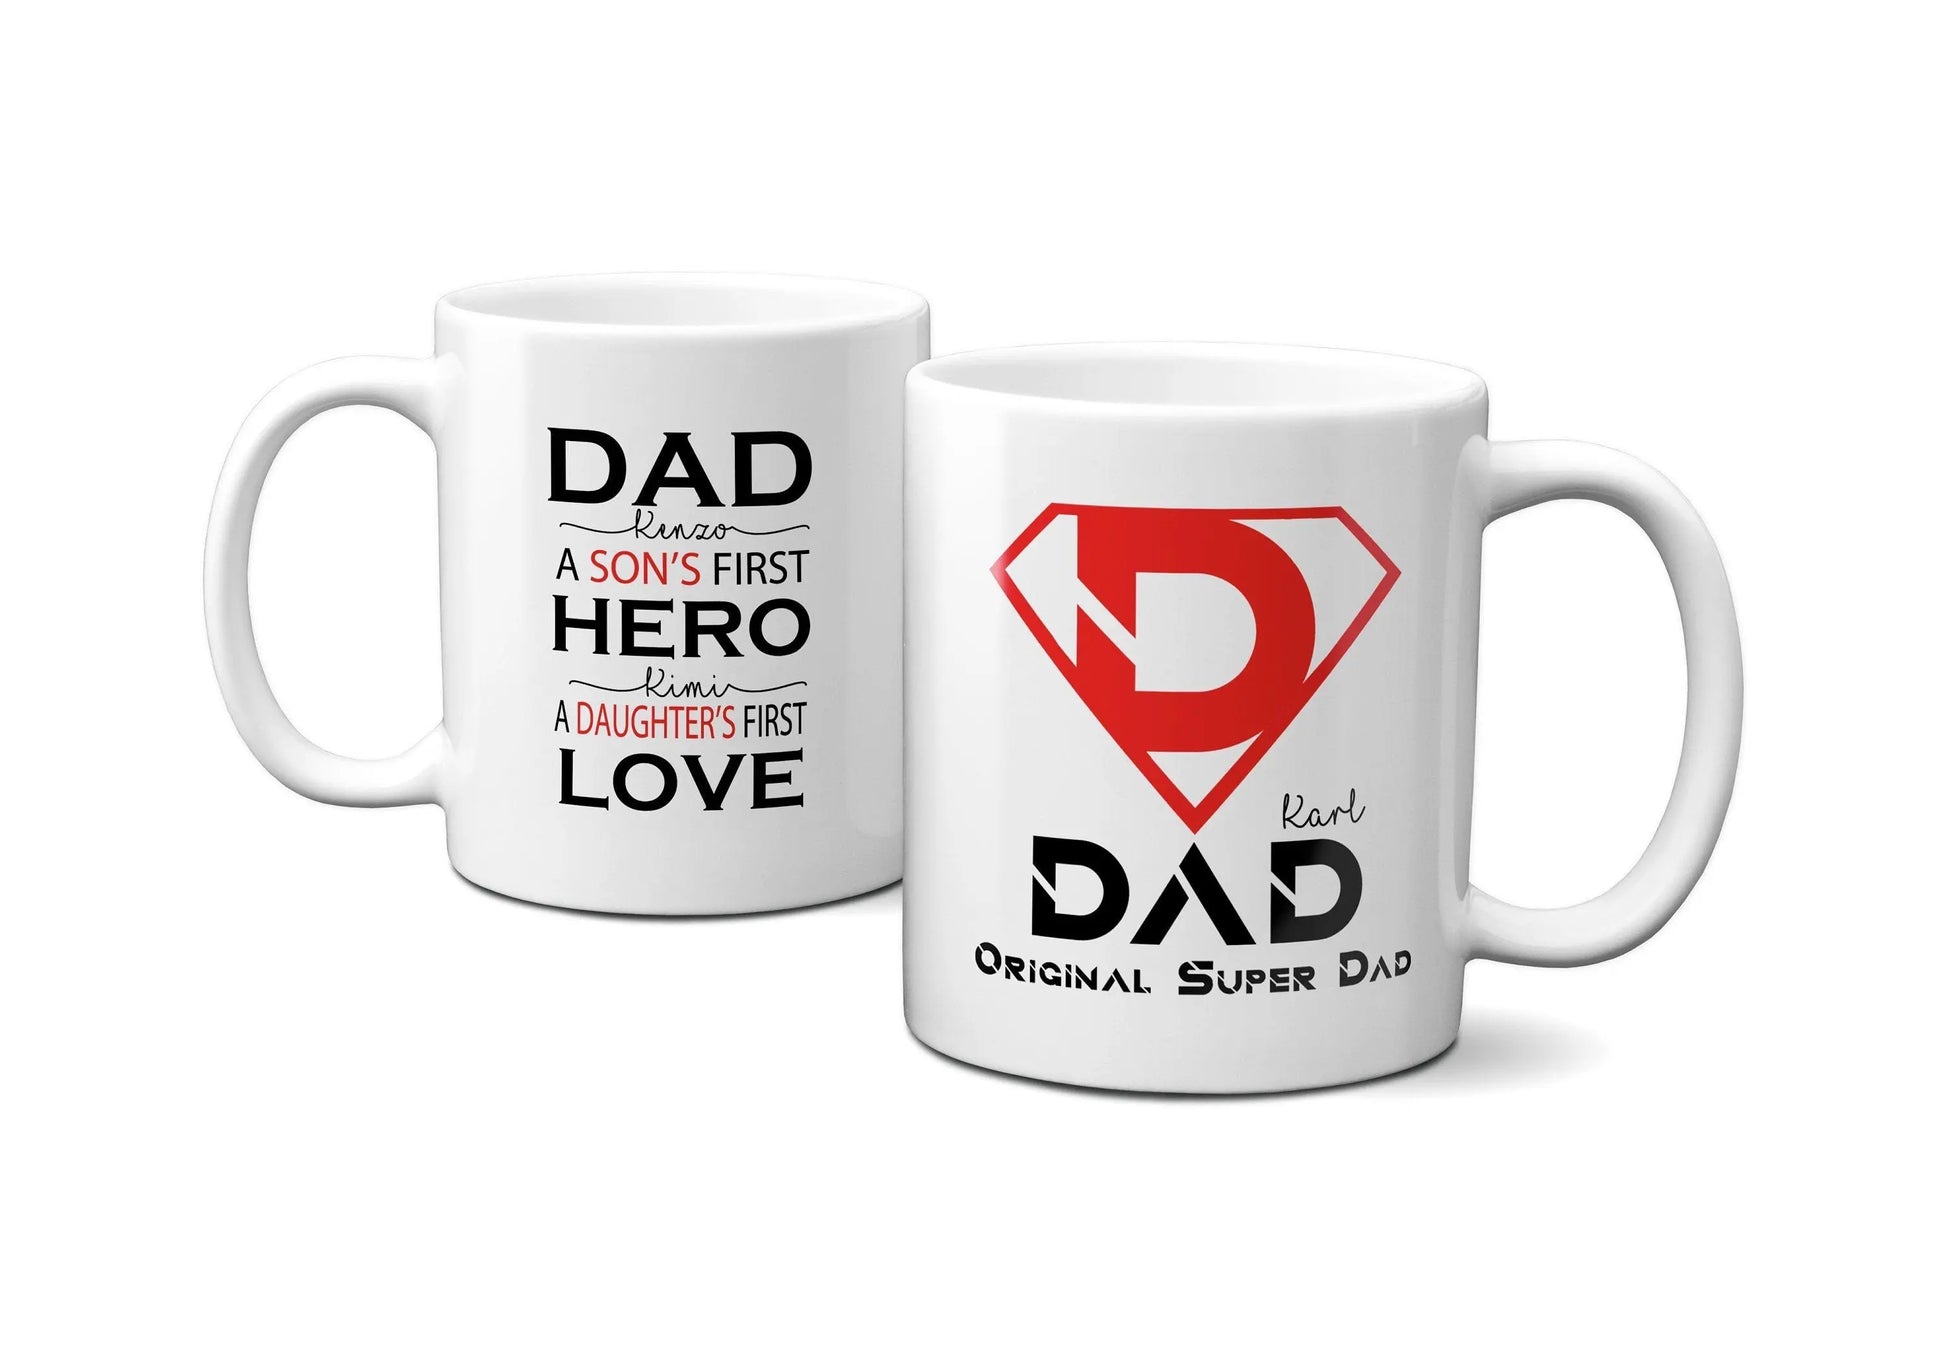 Best Dad Ever Gift Ideas, Personalized Gifts for Dad Coffee Mug, Dad Gift Birthday Mug